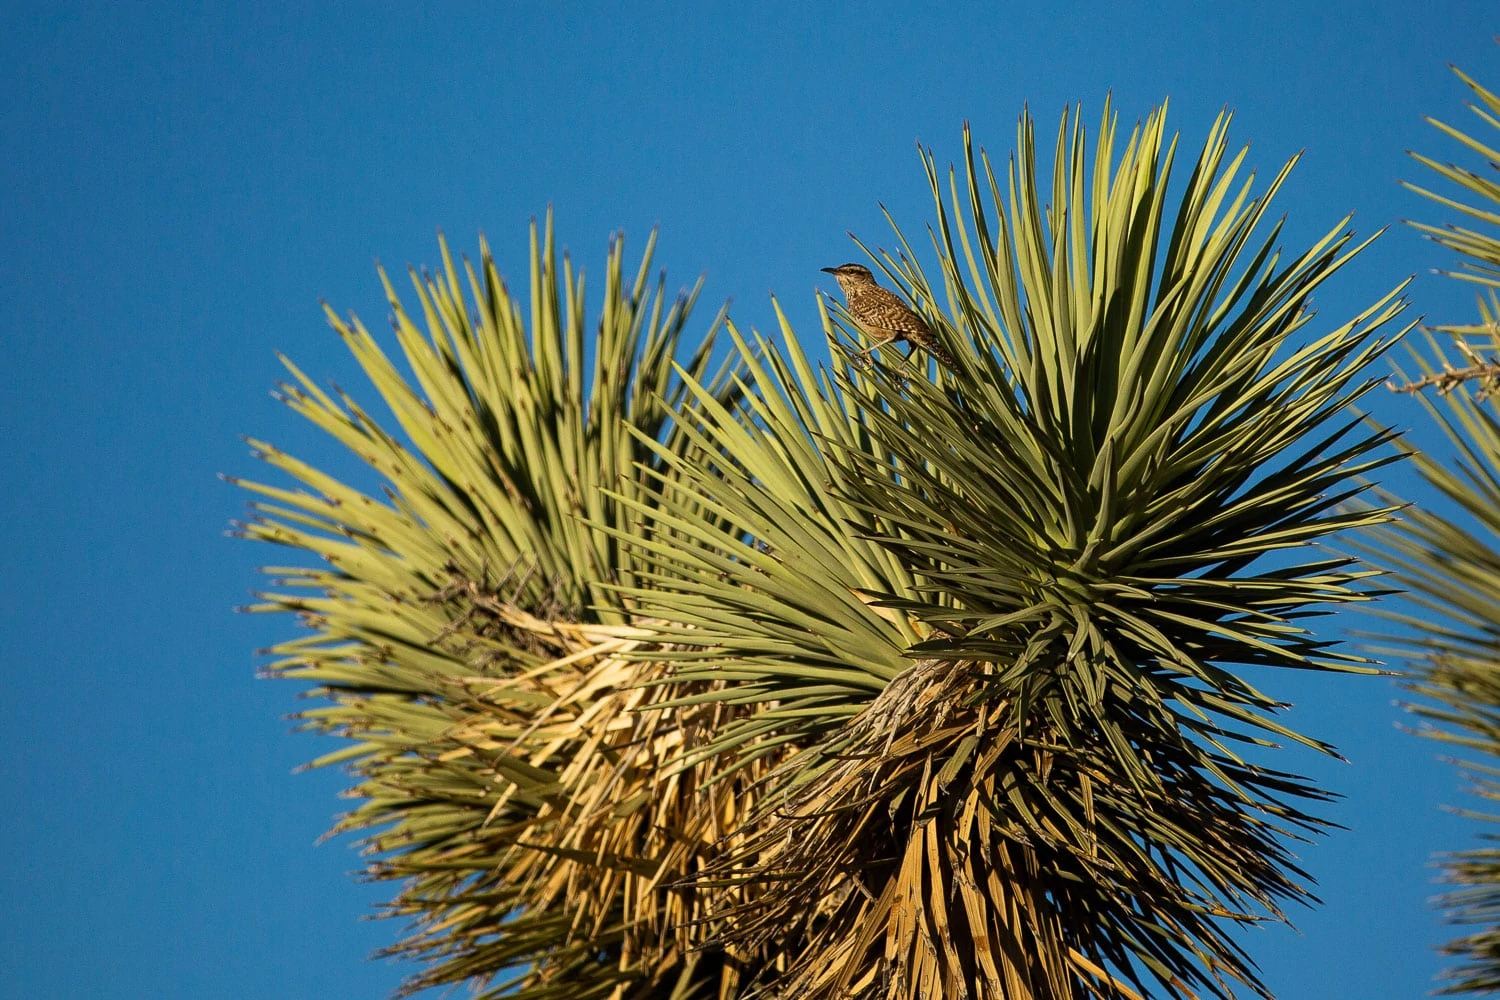 a cactus wren perches on a Yucca in Joshua Tree National Park.